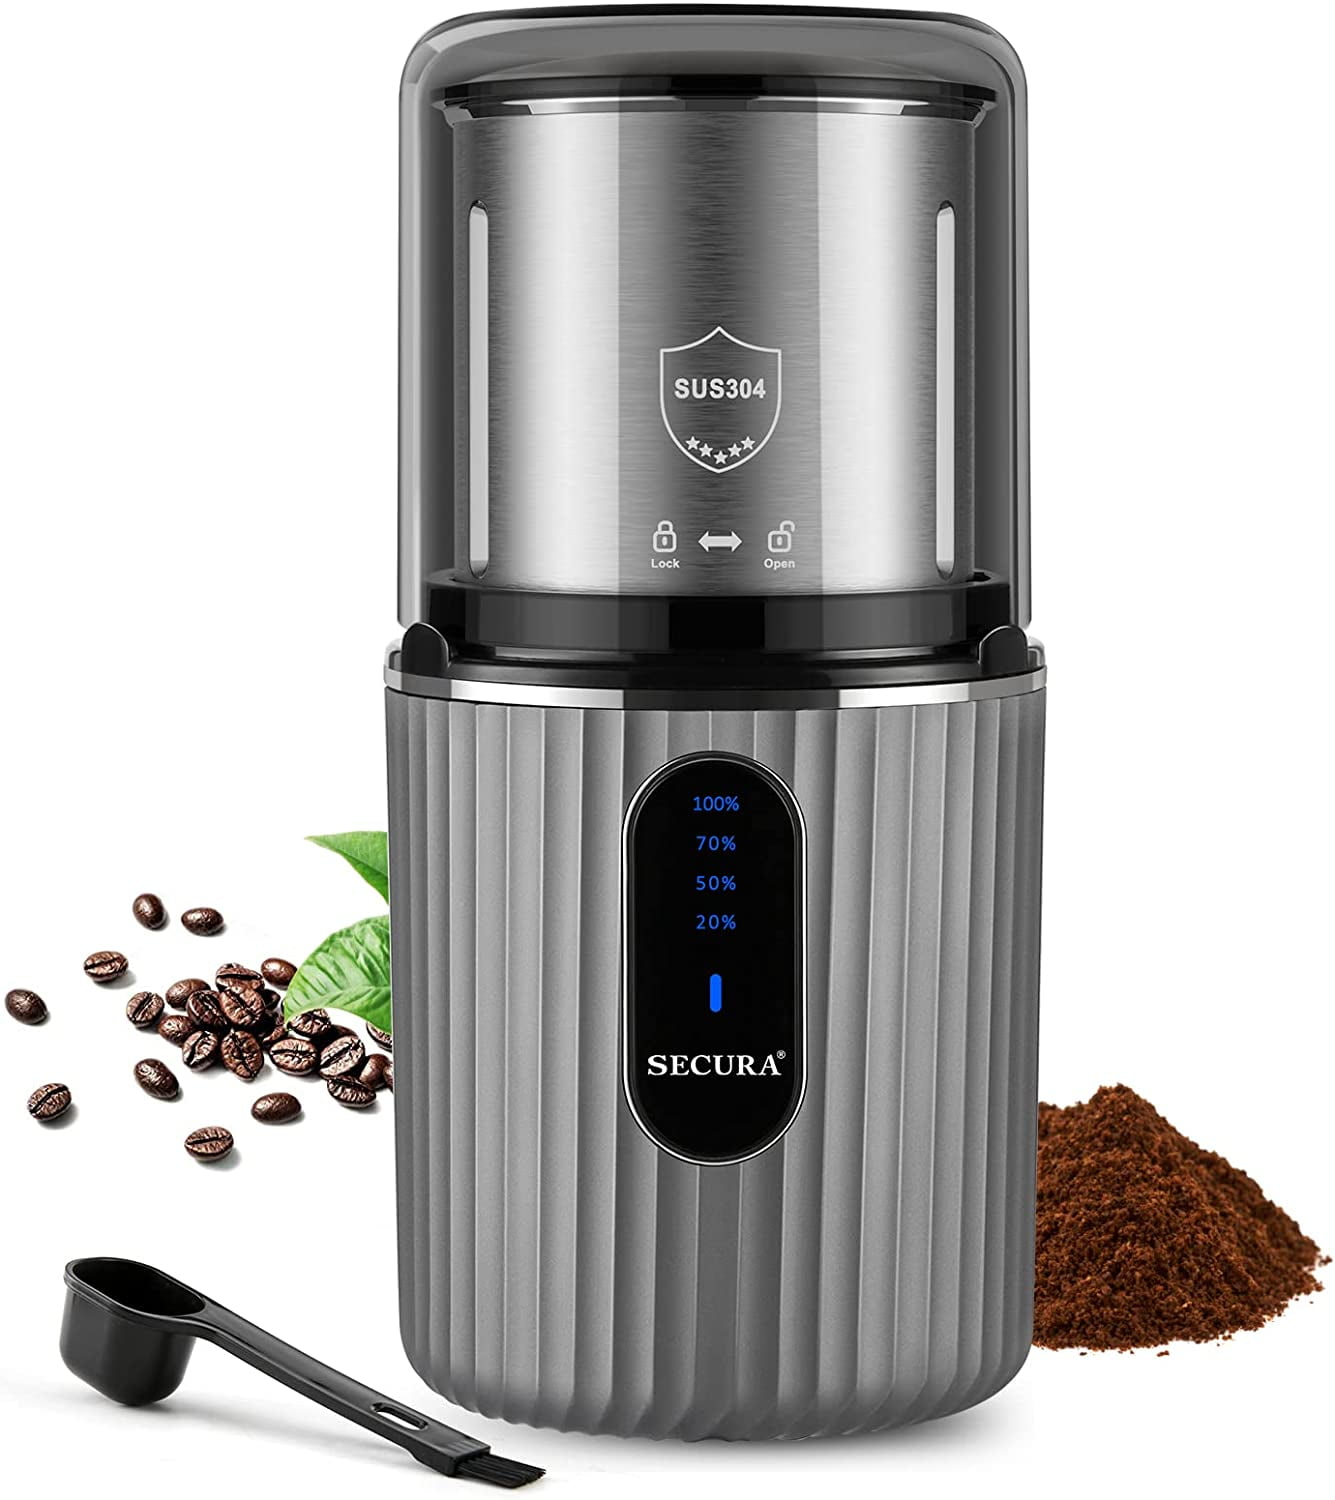  Cordless Coffee Grinder Electric, Adjustable Coffee Grinder,  Portable Electric Espresso Spices Grinder Kitchen Coffee Making Tool,  Rechargeable Coffee Bean Grinder for Home : Home & Kitchen